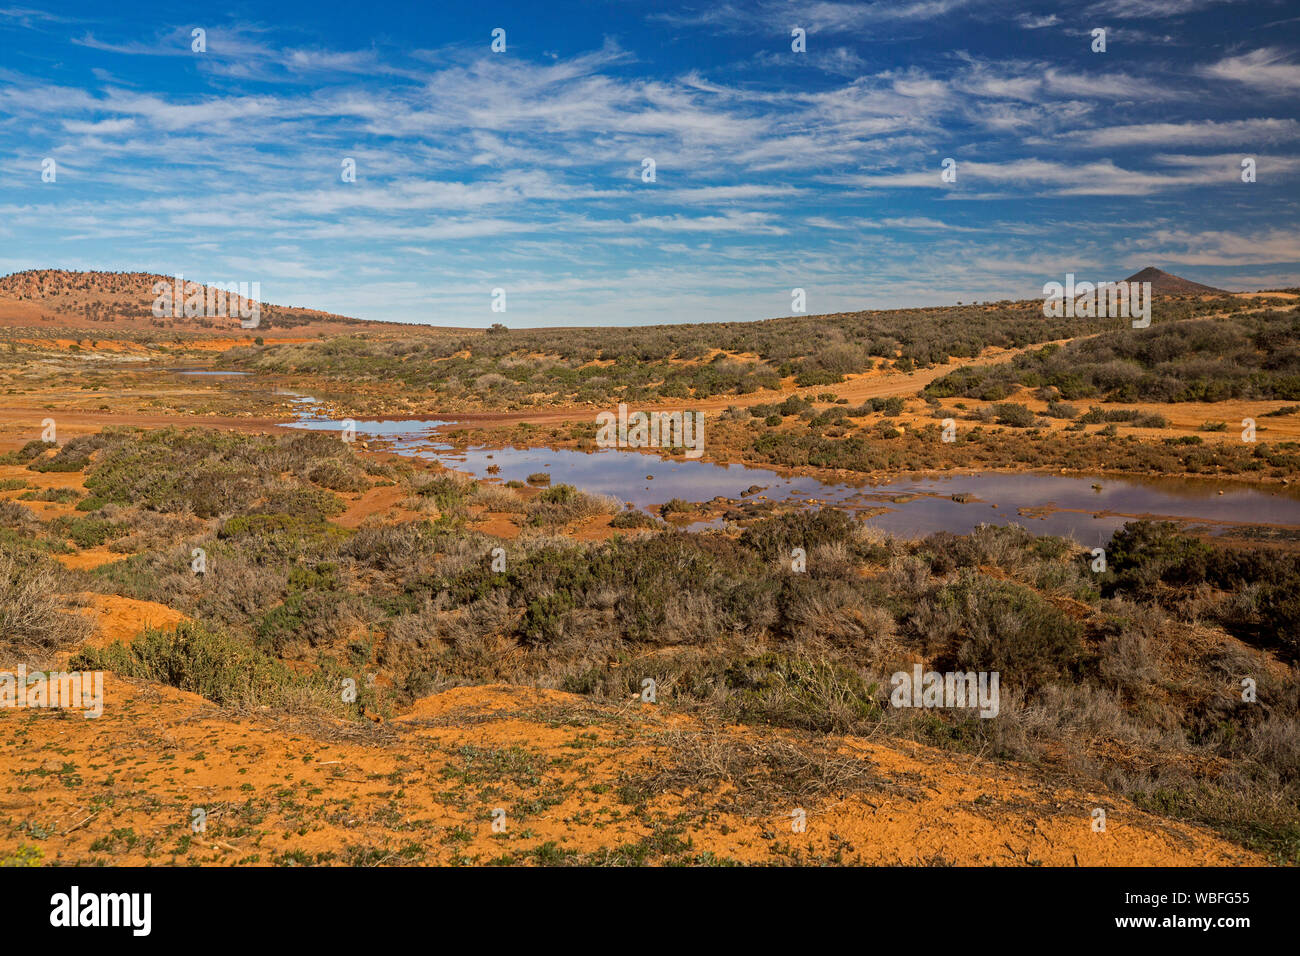 Outback landscape with red soil covered in saltbush & blue sky reflected in water of Willochra Creek  in Flinders Ranges region South Australia Stock Photo